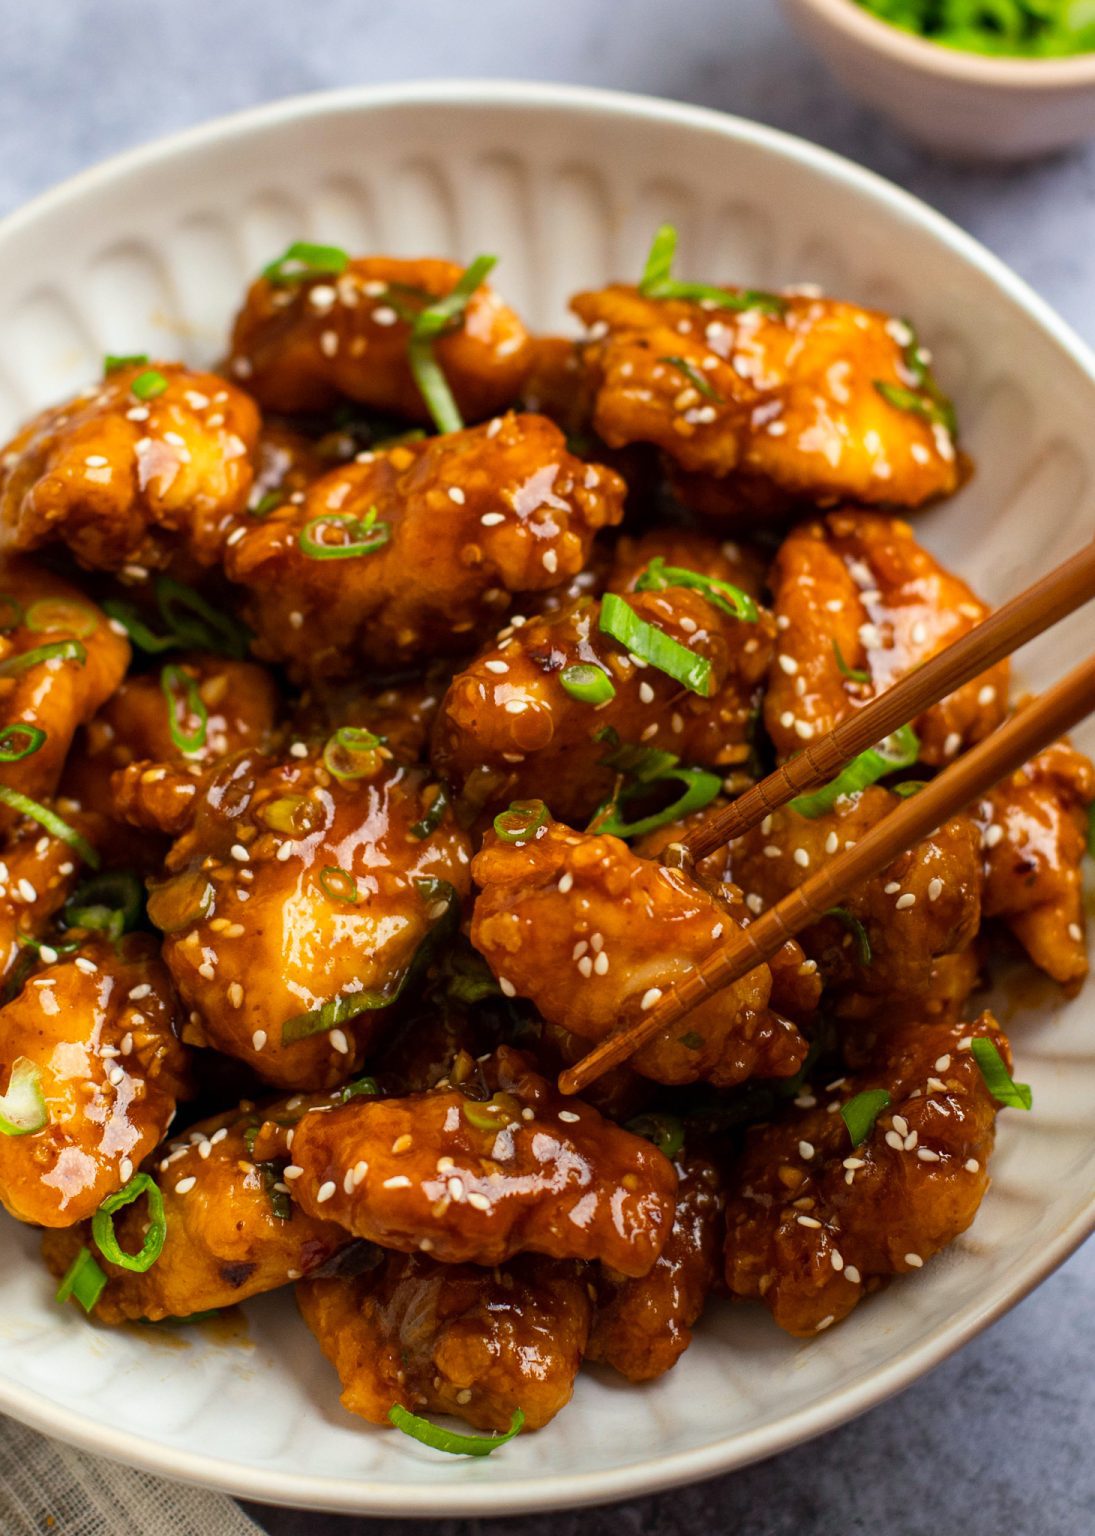 General Tso's Chicken - Once Upon a Chef